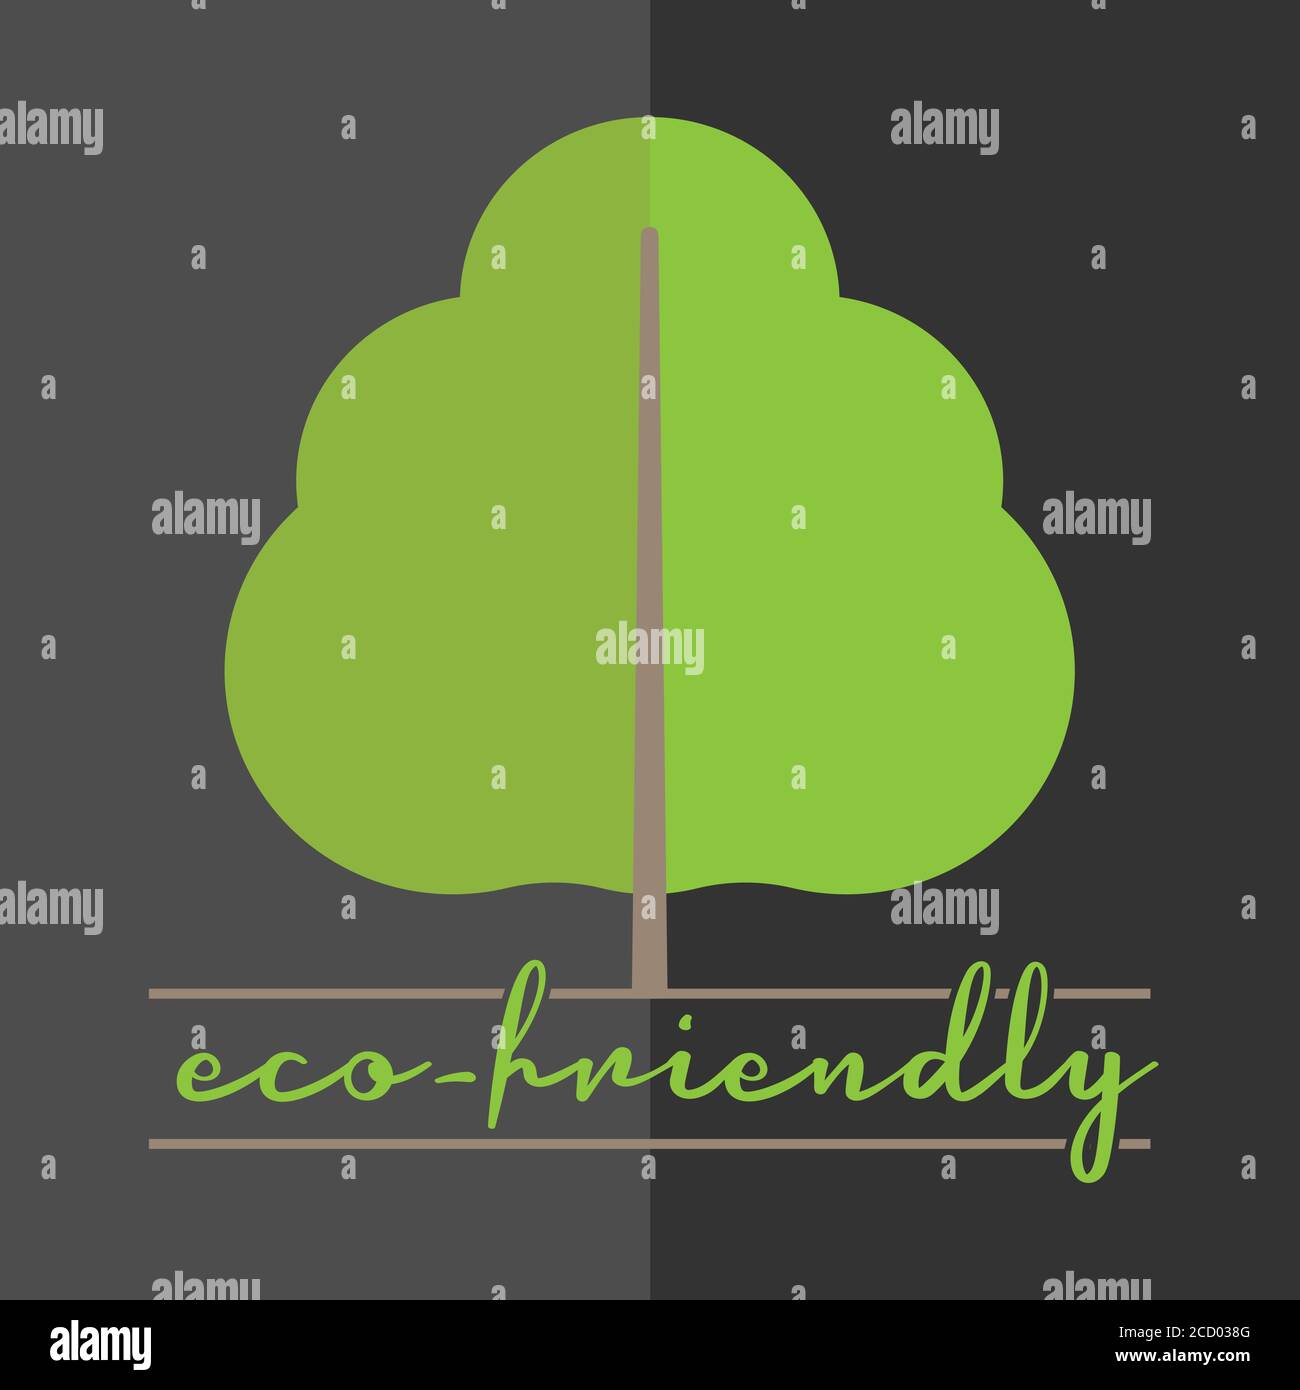 eco-friendly logo or label with tree symbol and text, vector illustration Stock Vector